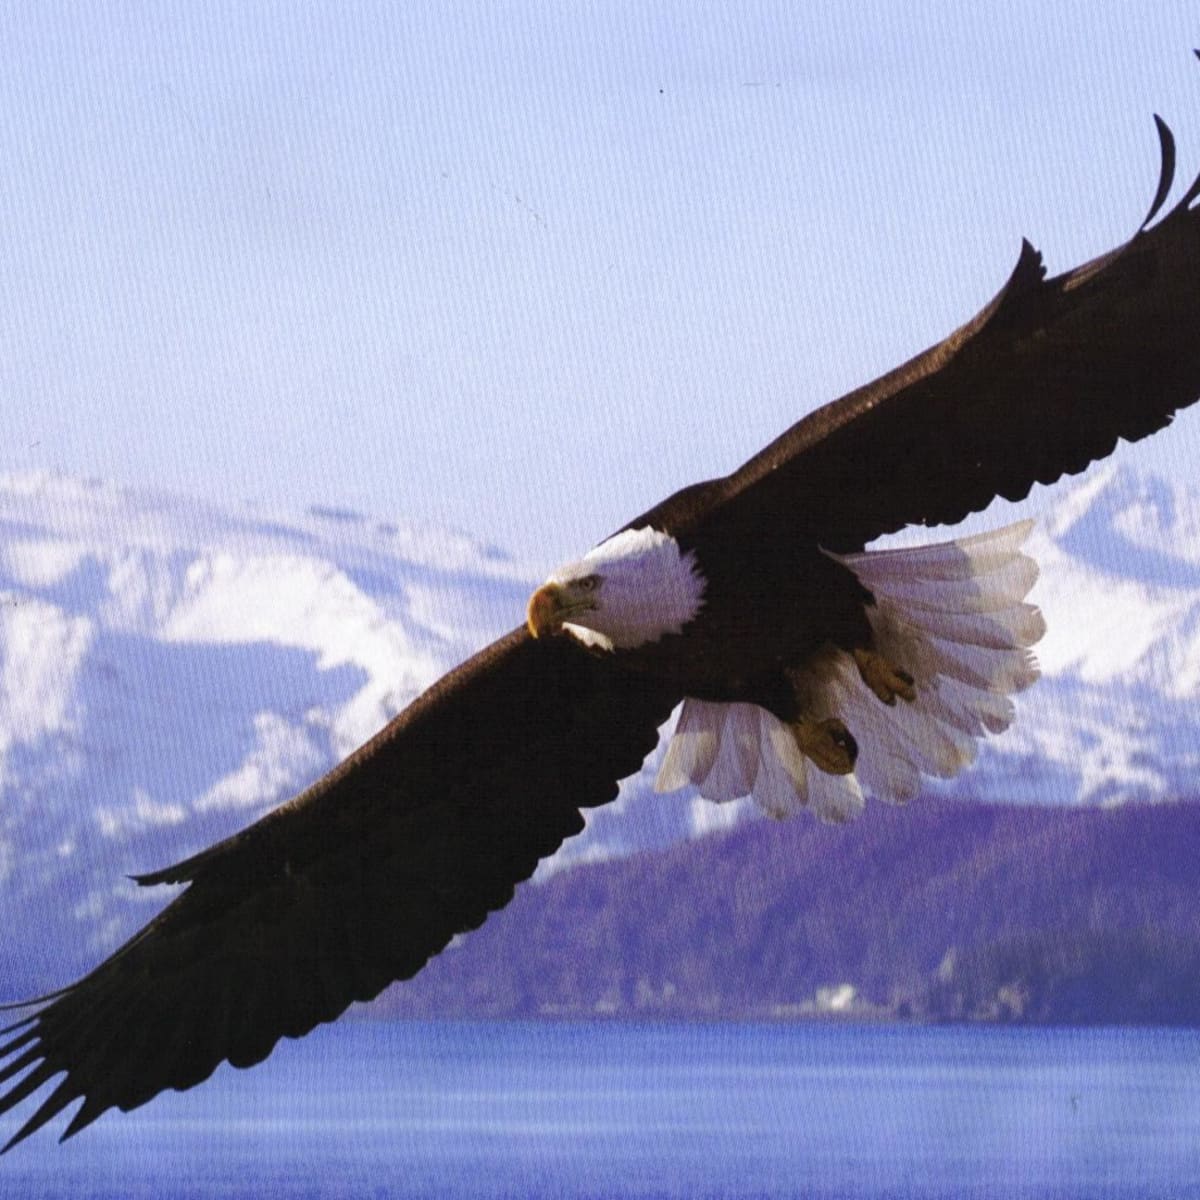 Bird of Prey: The Story of the Rarest Eagle on Earth – A Film Review -  10,000 Birds